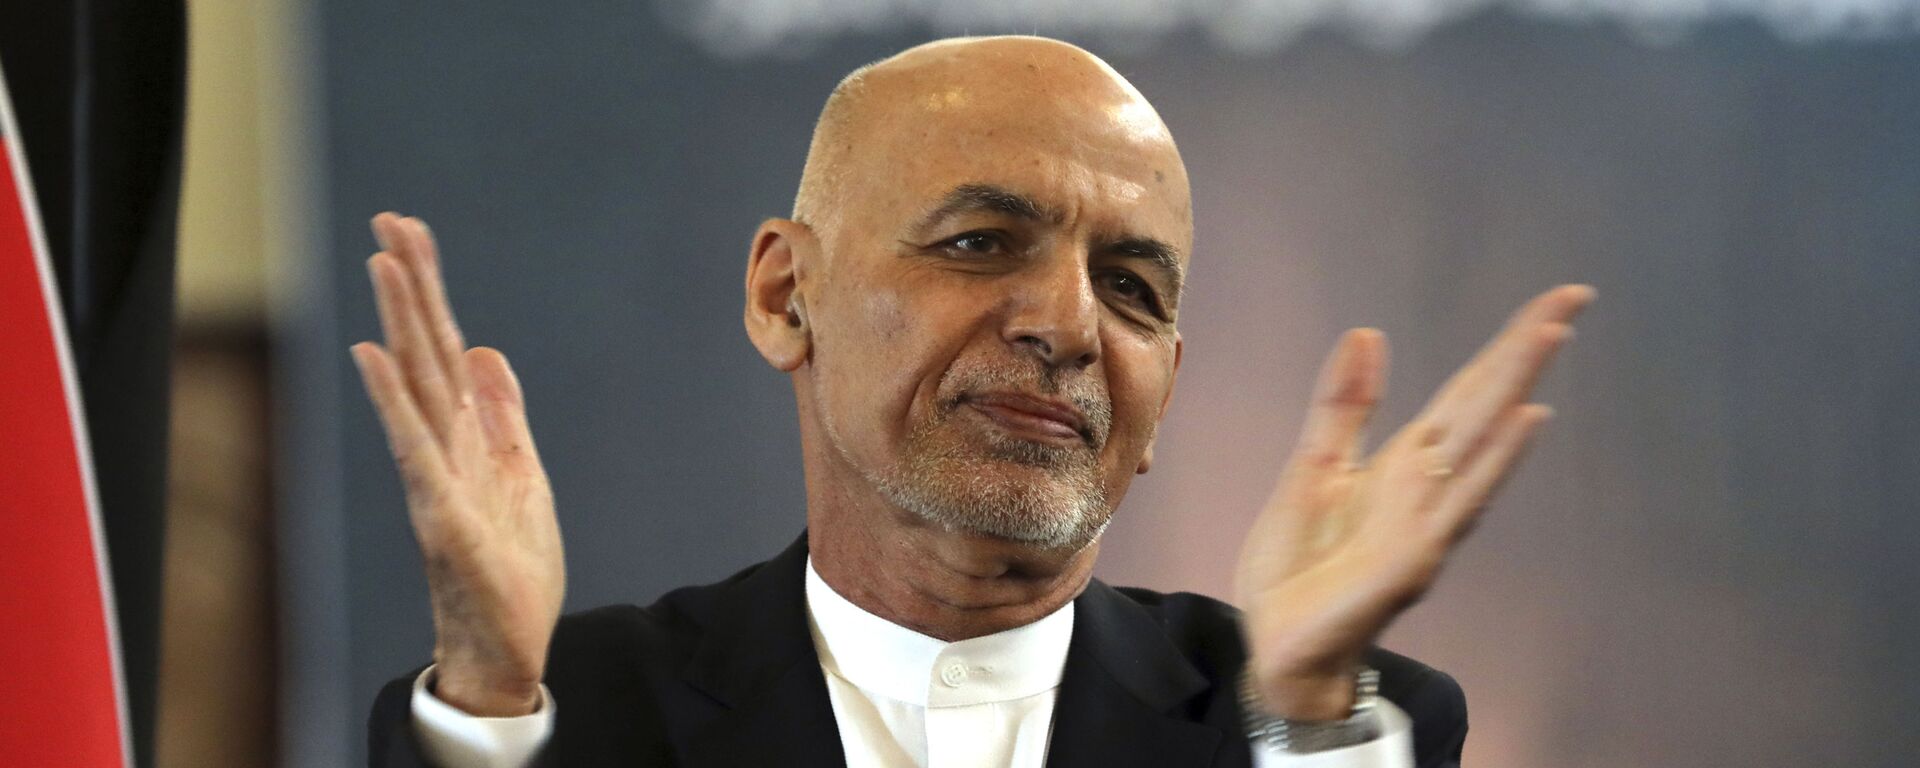 FILE - In this March 21, 2021 file photo, Afghan President Ashraf Ghani speaks during a ceremony celebrating the Persian New Year, Nowruz at the presidential palace in Kabul, Afghanistan. Afghanistan’s embattled president left the country Sunday, Aug. 15, 2021, joining his fellow citizens and foreigners in a stampede fleeing the advancing Taliban and signaling the end of a 20-year Western experiment aimed at remaking Afghanistan.  - Sputnik International, 1920, 27.09.2021